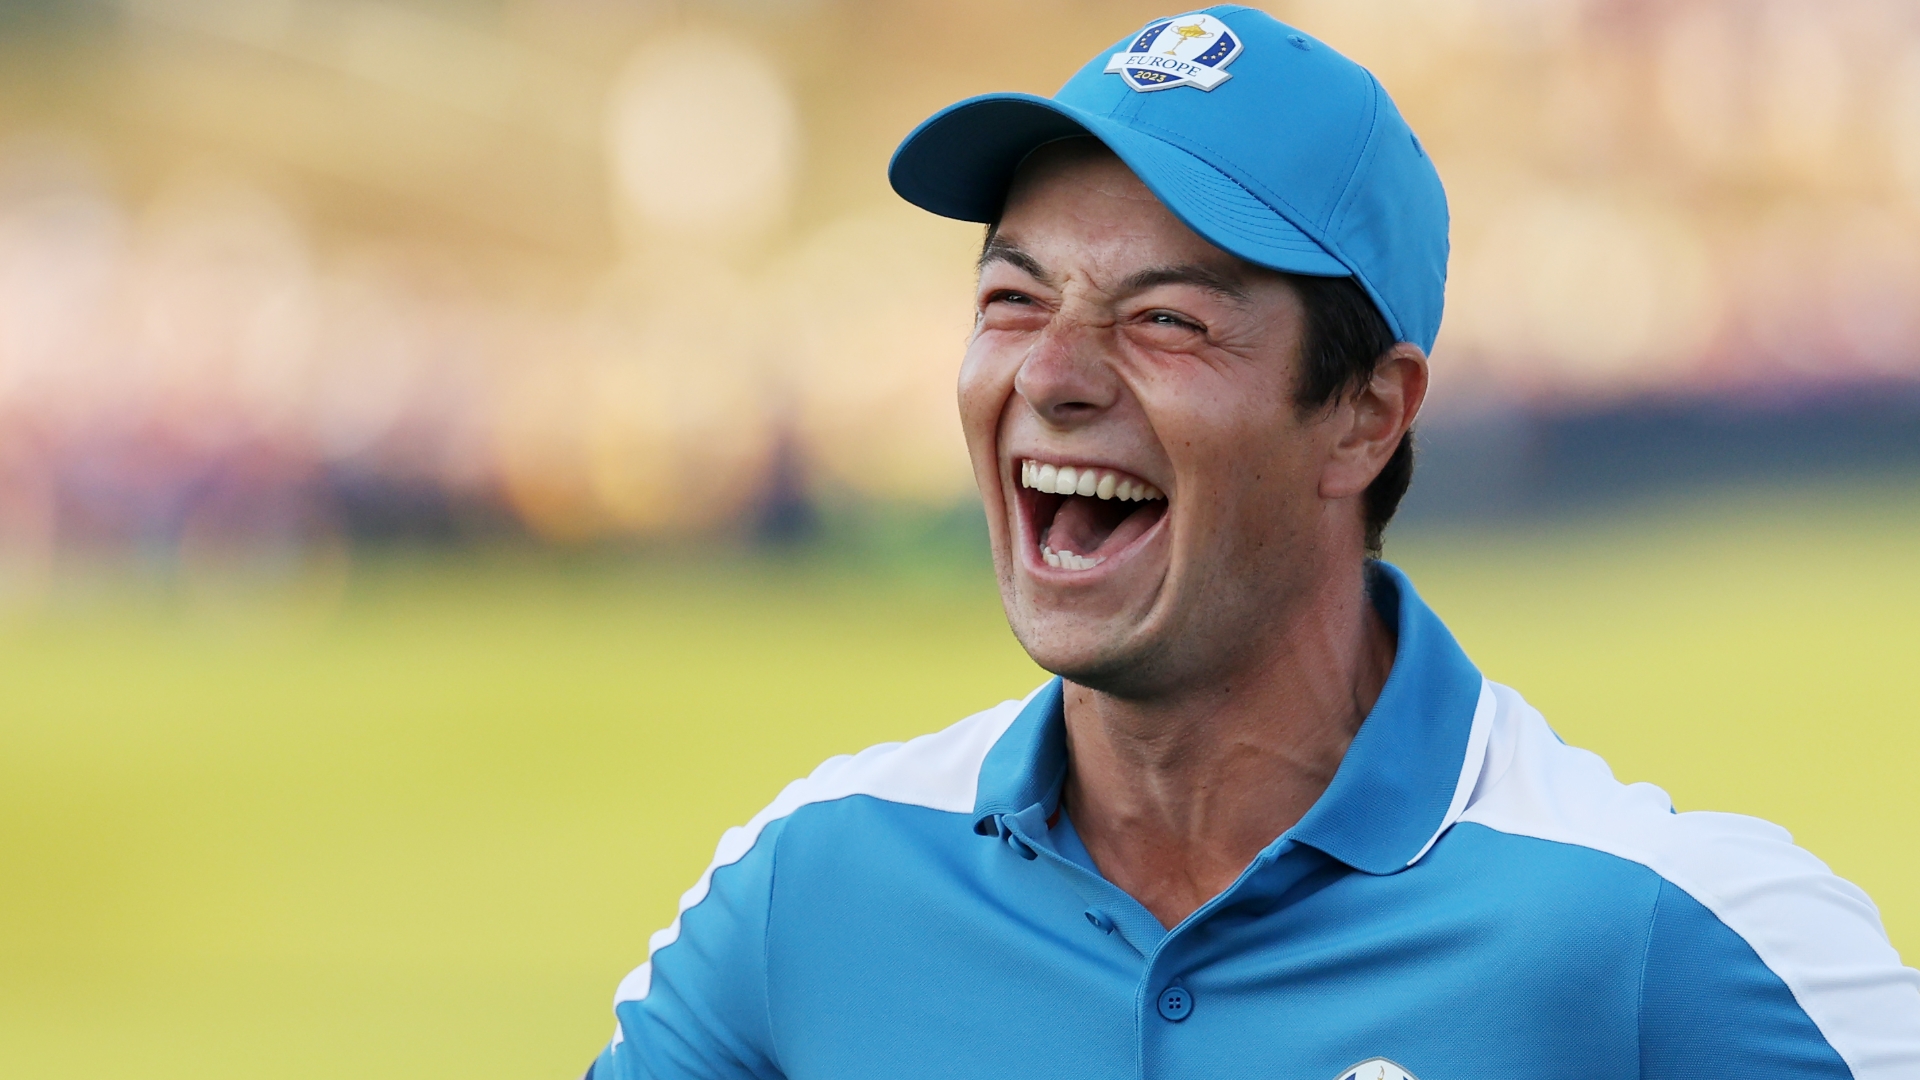 Viktor Hovland gets Team Europe off to electric start with chip-in